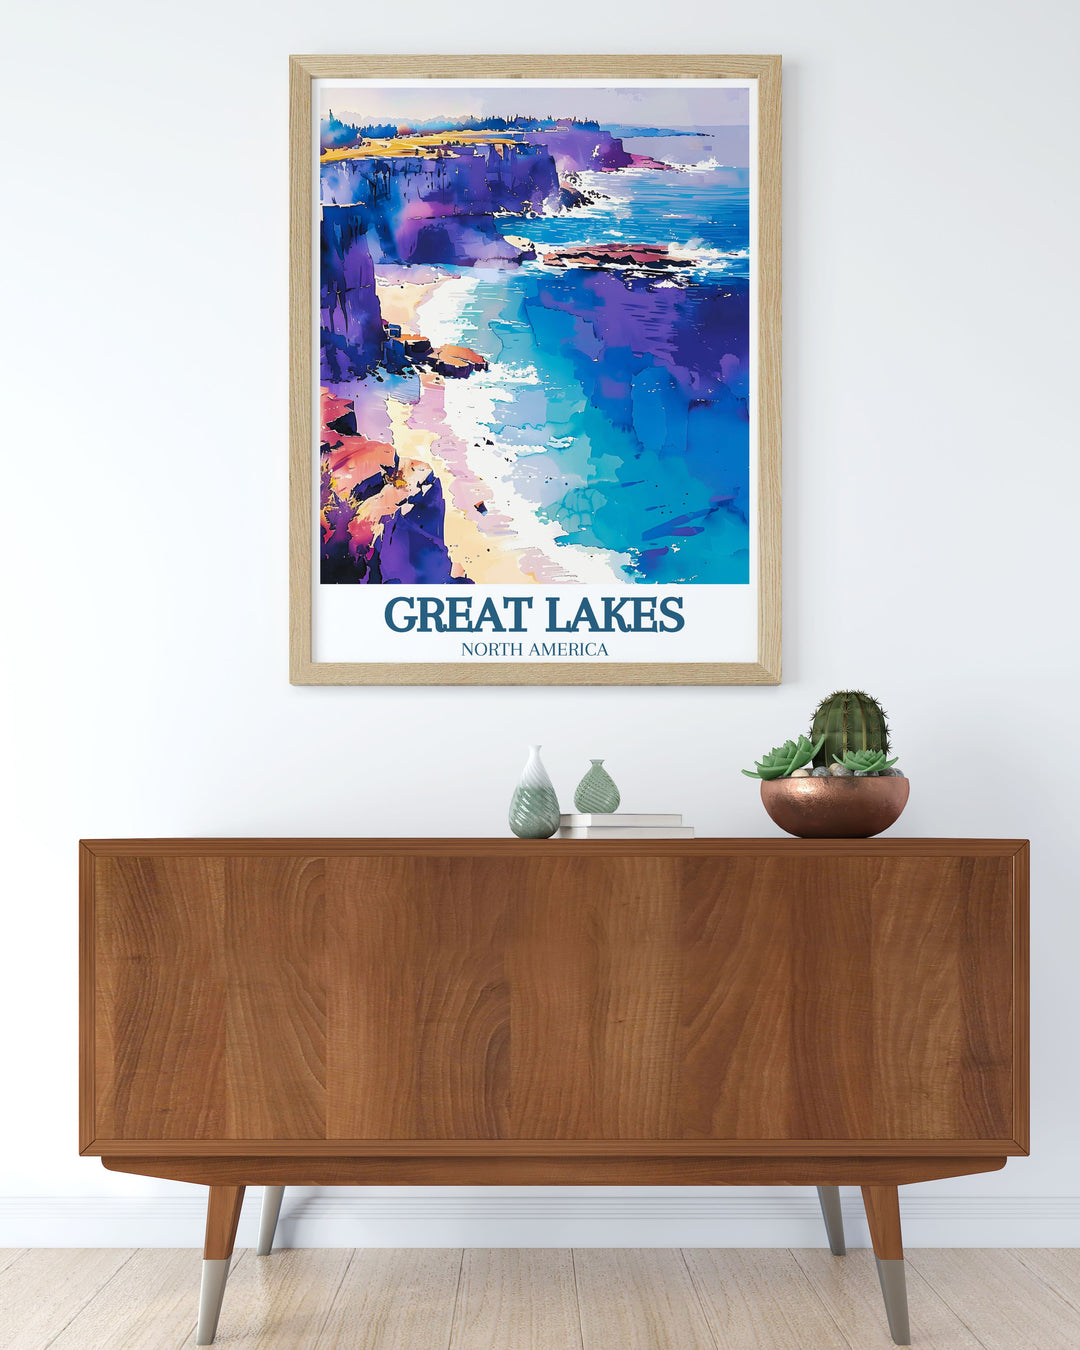 Featuring a vibrant depiction of Lake Erie and Kelleys Island, this travel poster captures the serene charm and picturesque views of the region, making it a captivating piece for your home decor.